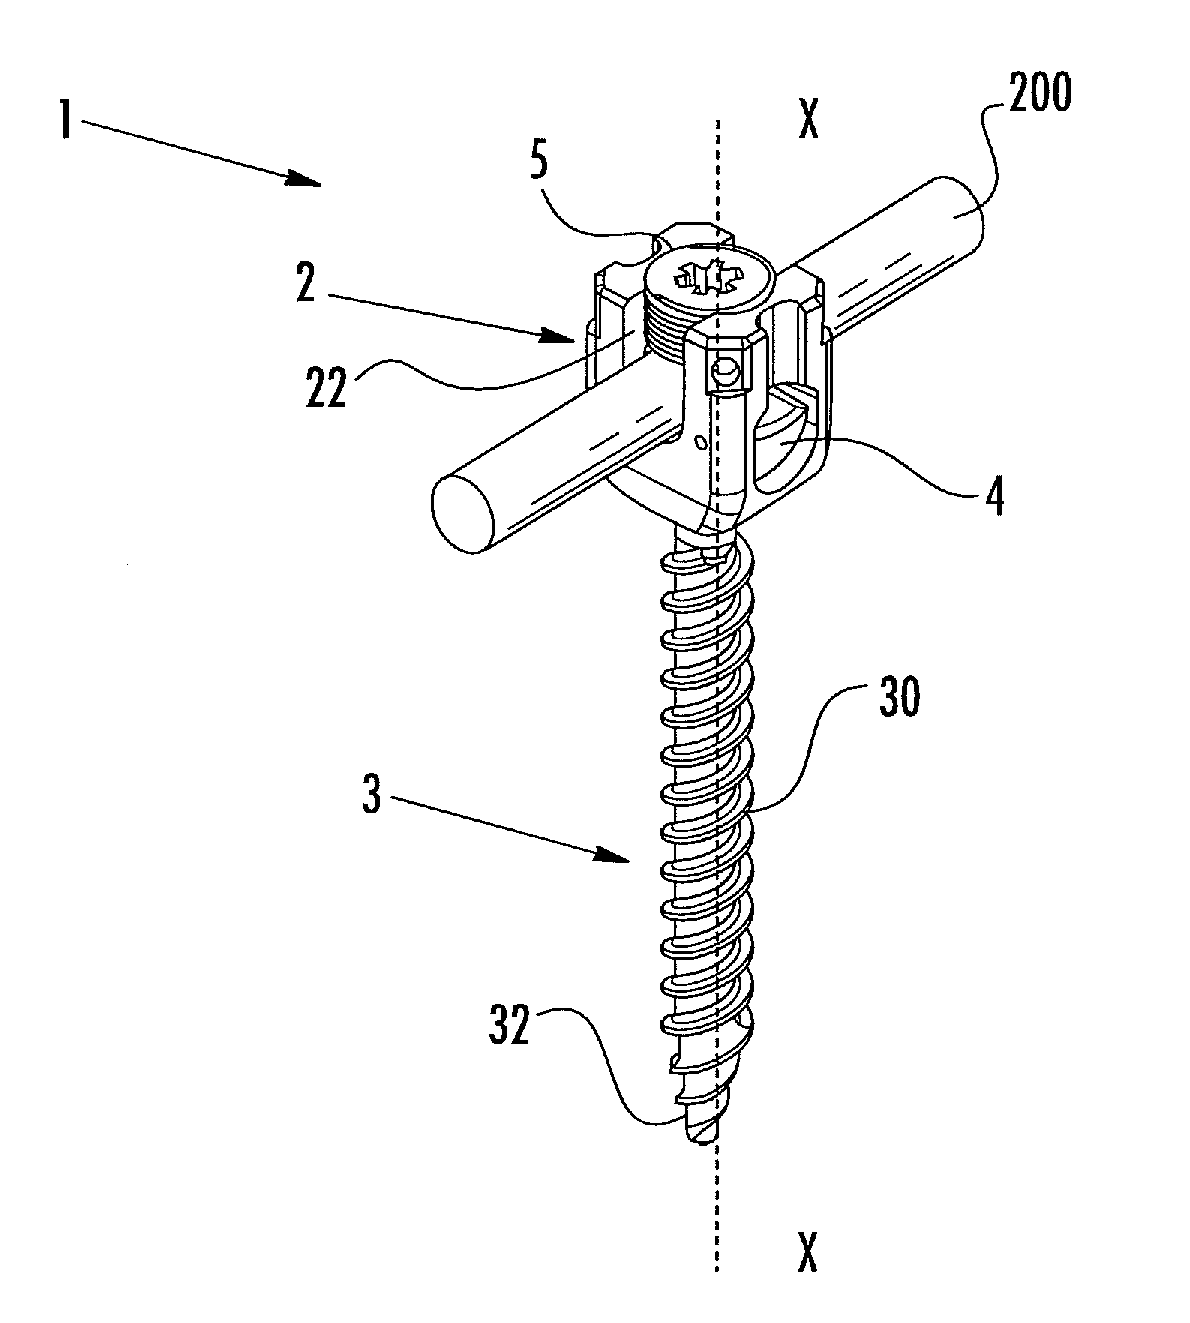 Polyaxial pedicle screw and fixation system kit comprising the screw